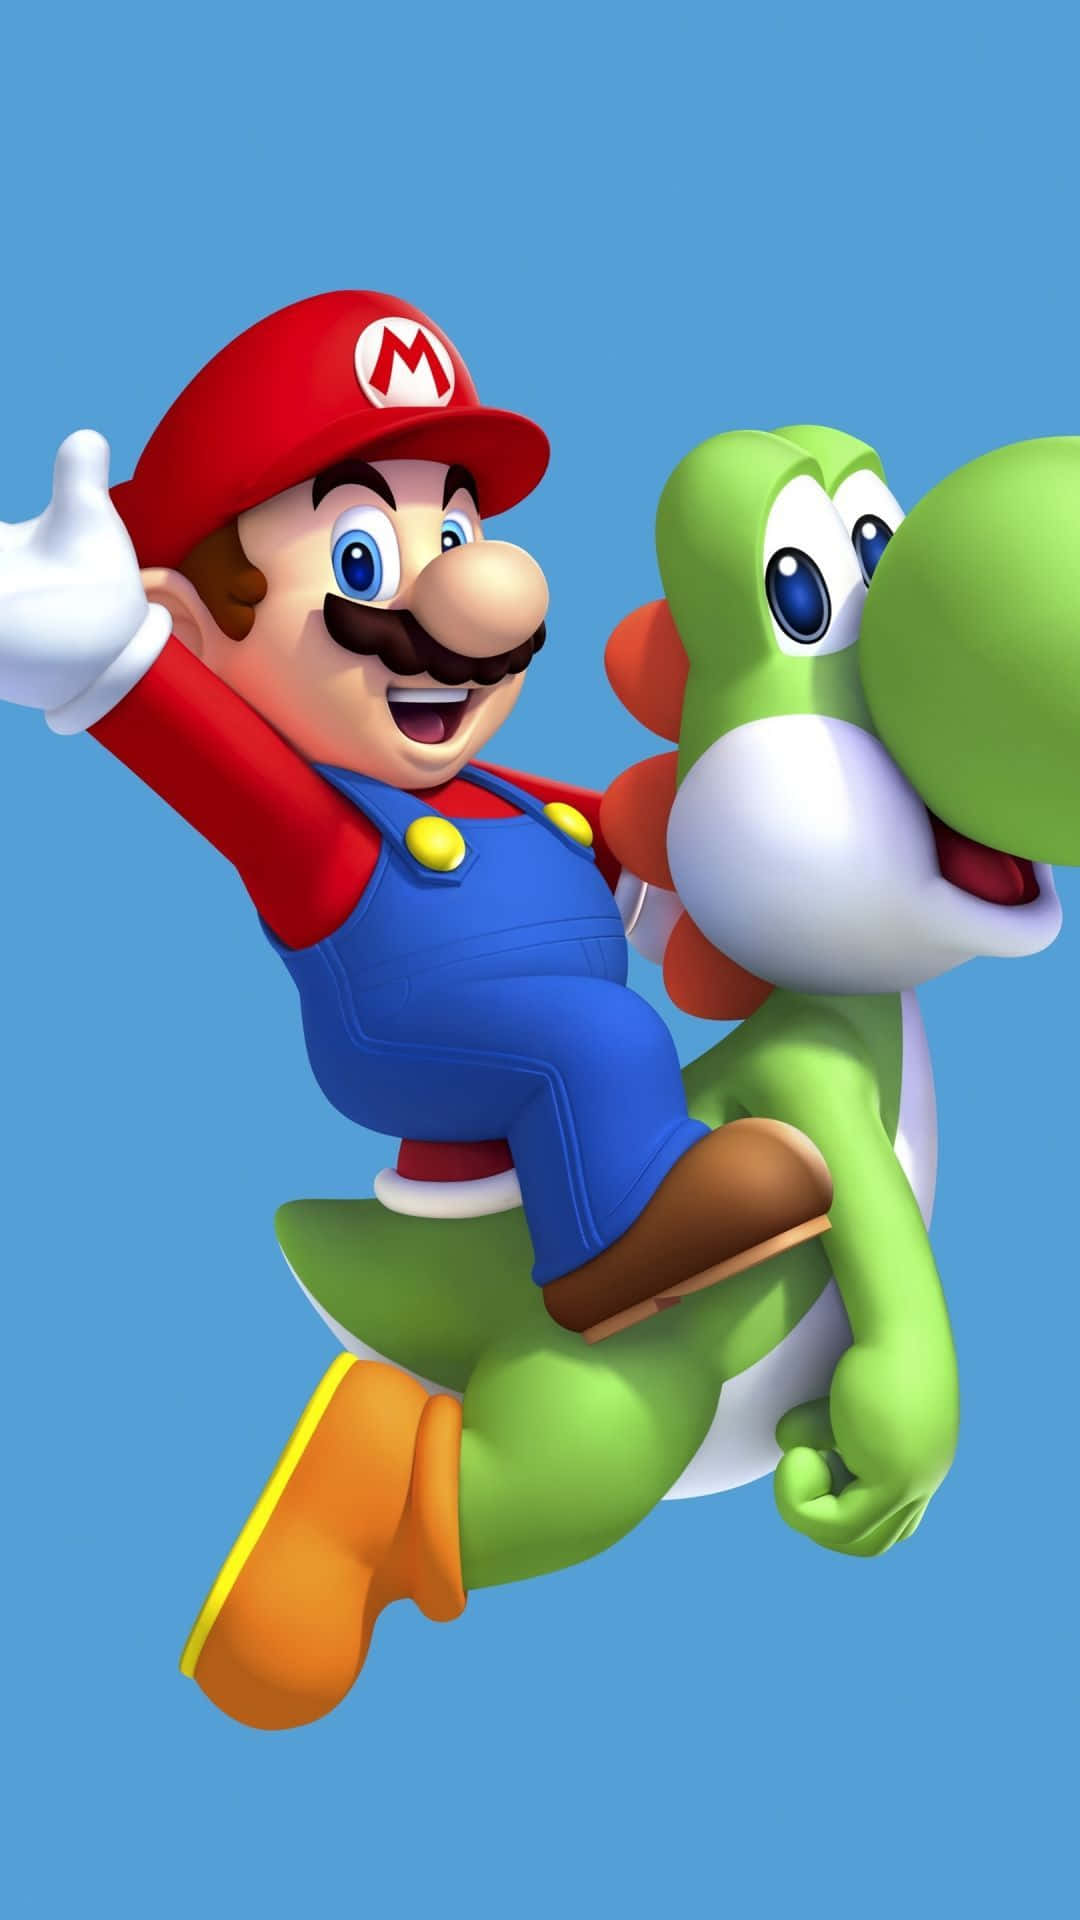 Download Get your game on with the new Super Mario iPhone Wallpaper